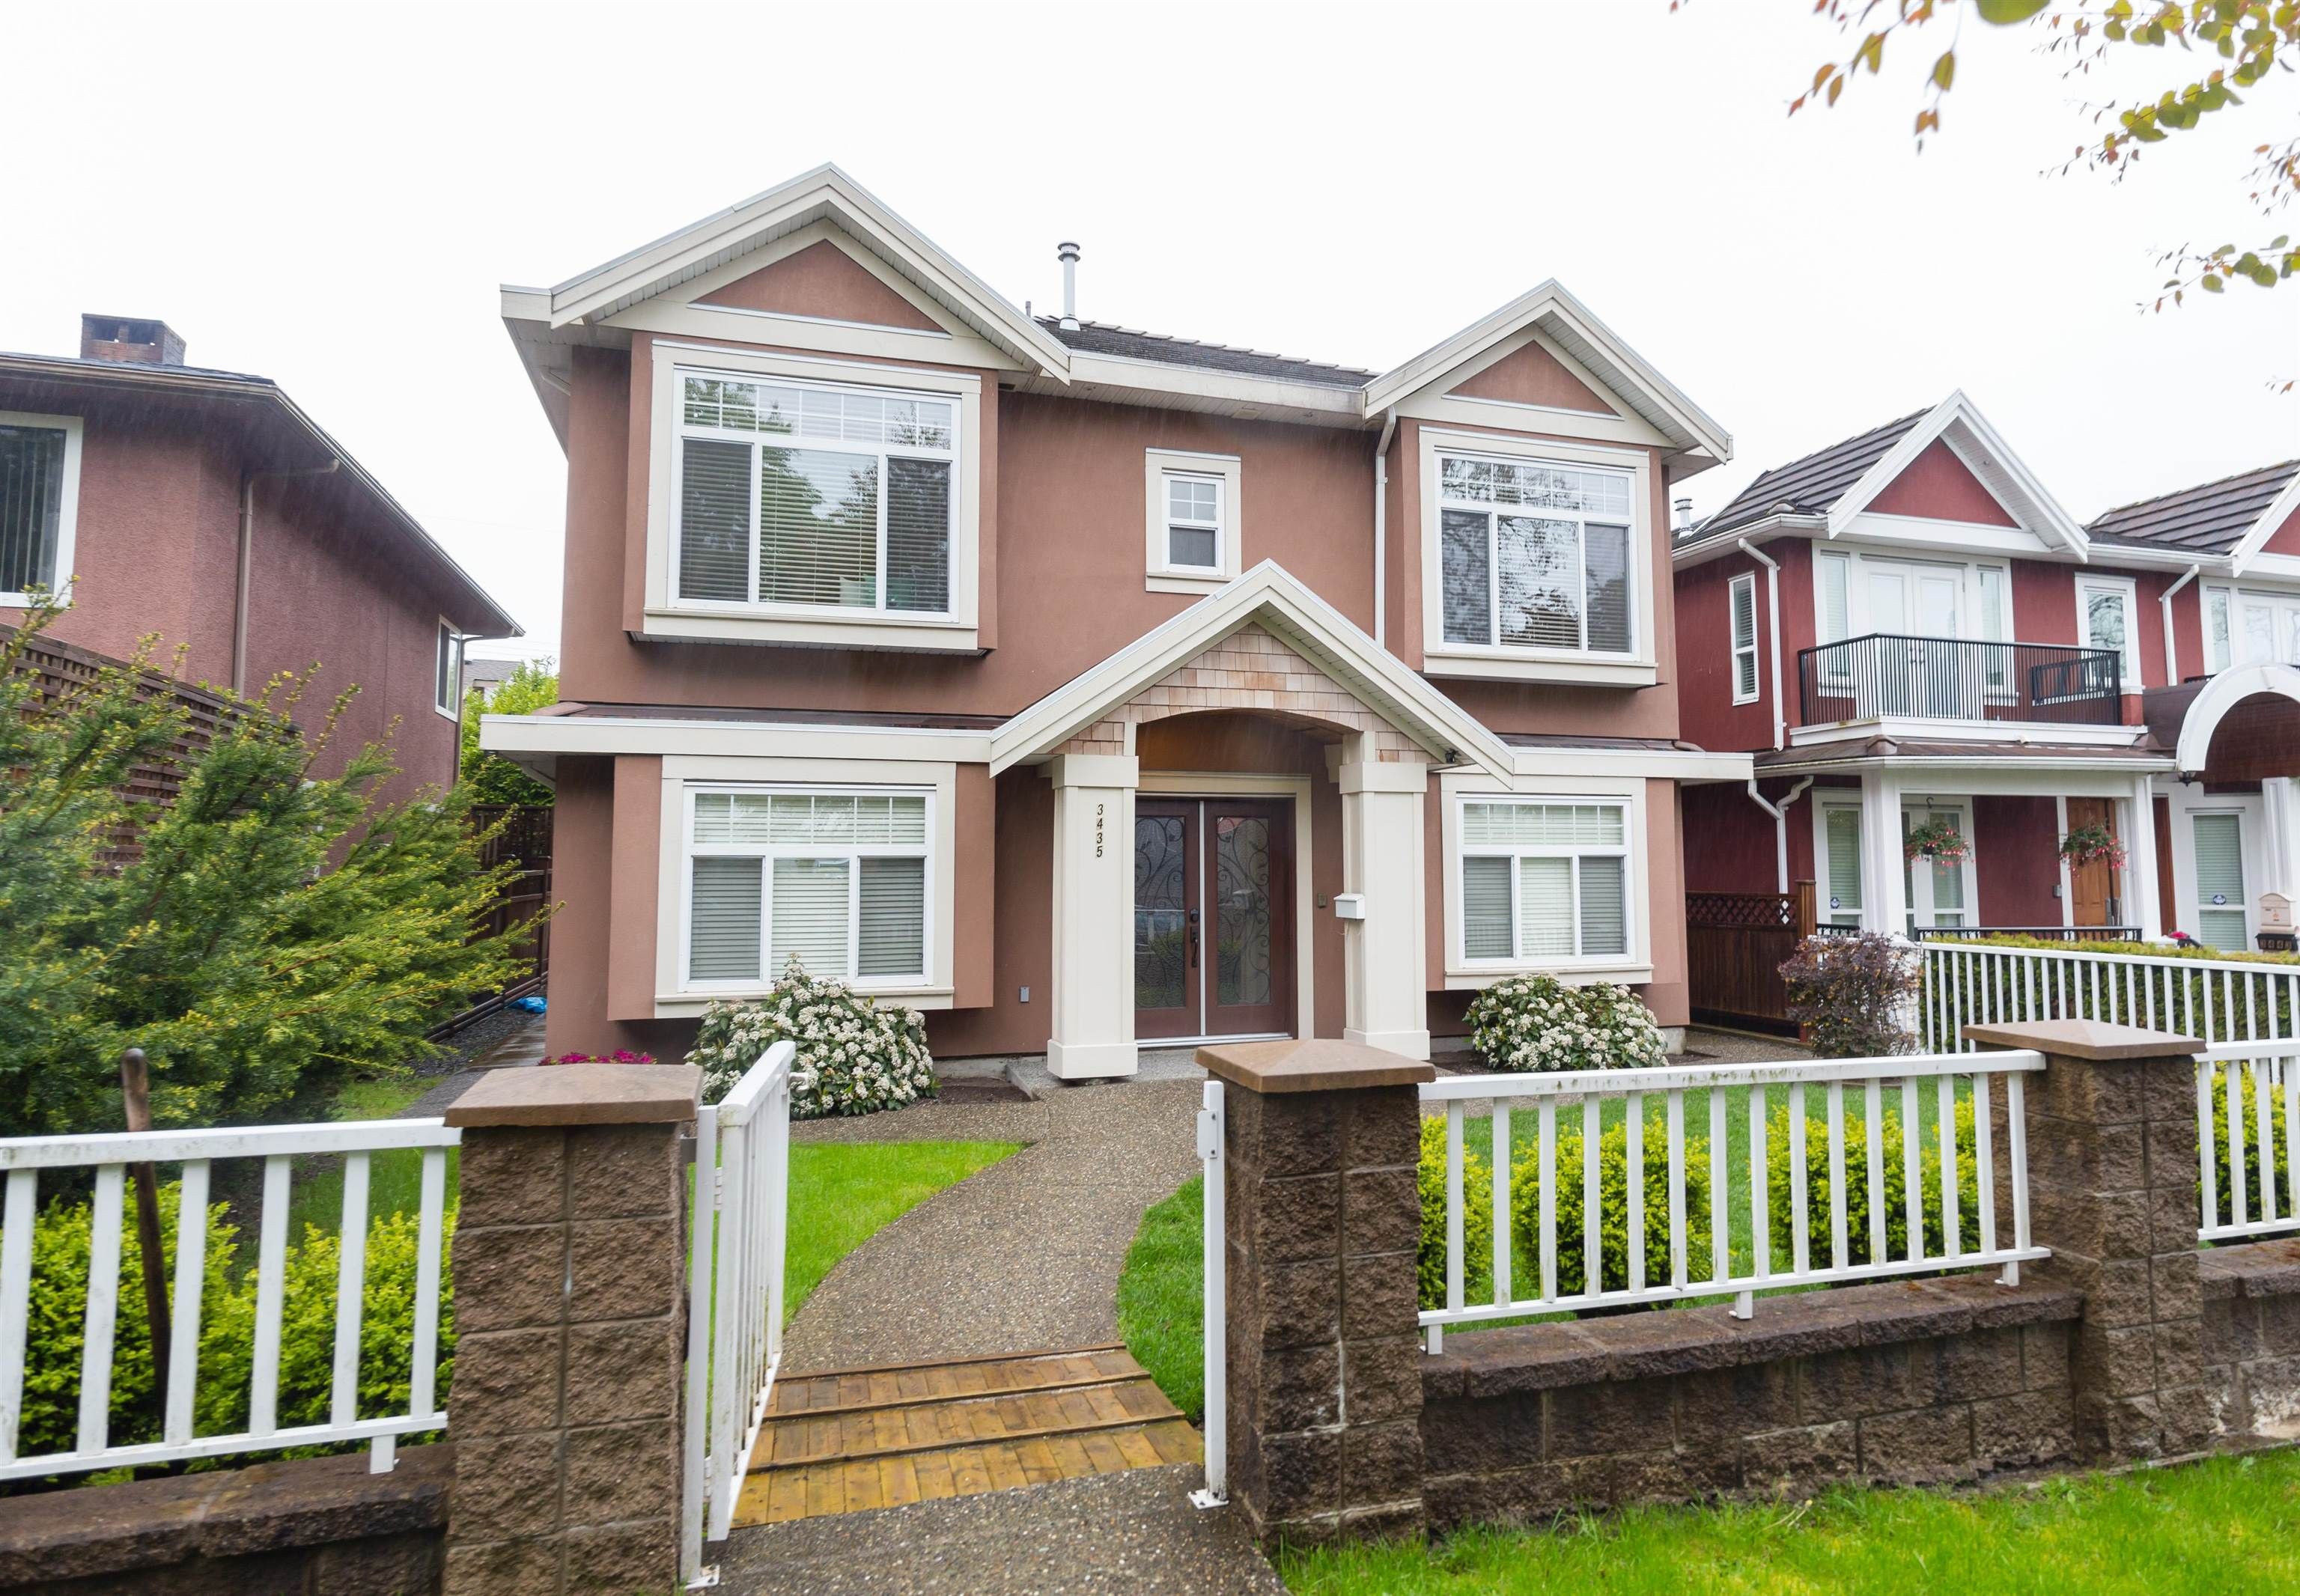 I have sold a property at 3435 4TH AVE E in Vancouver
